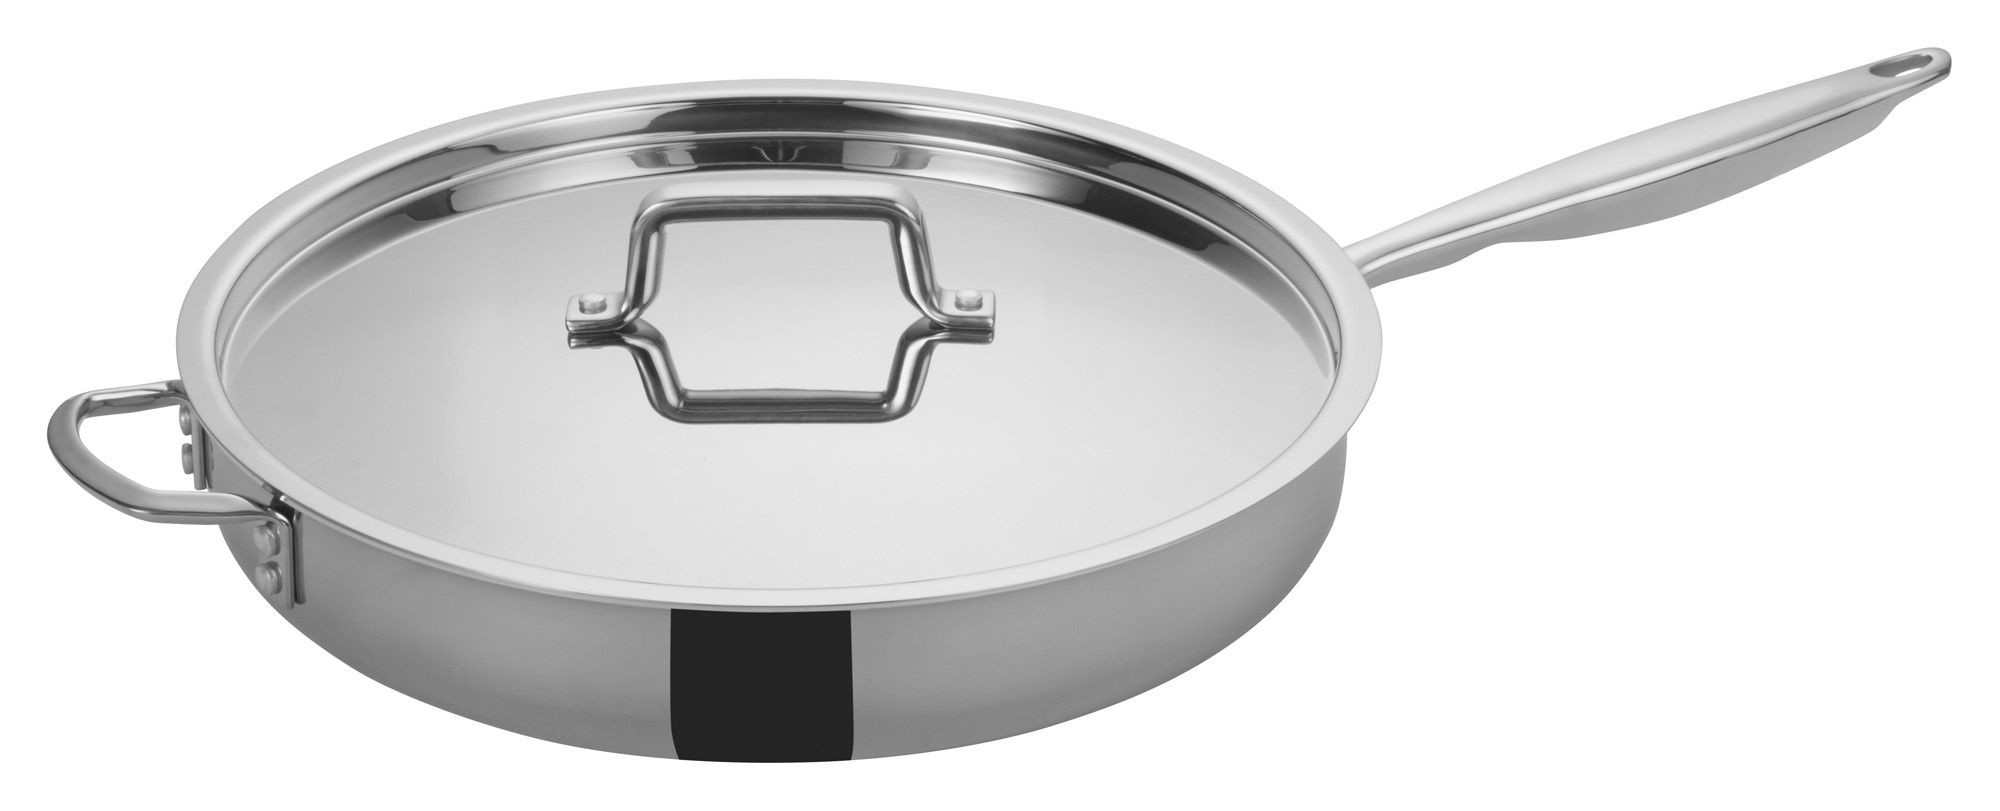 https://www.lionsdeal.com/itempics/Winco-TGET-7-Tri-Ply-Stainless-Steel-7-Qt--Saute-Pan-with-Cover--Helper-Handle-38435_xlarge.jpg